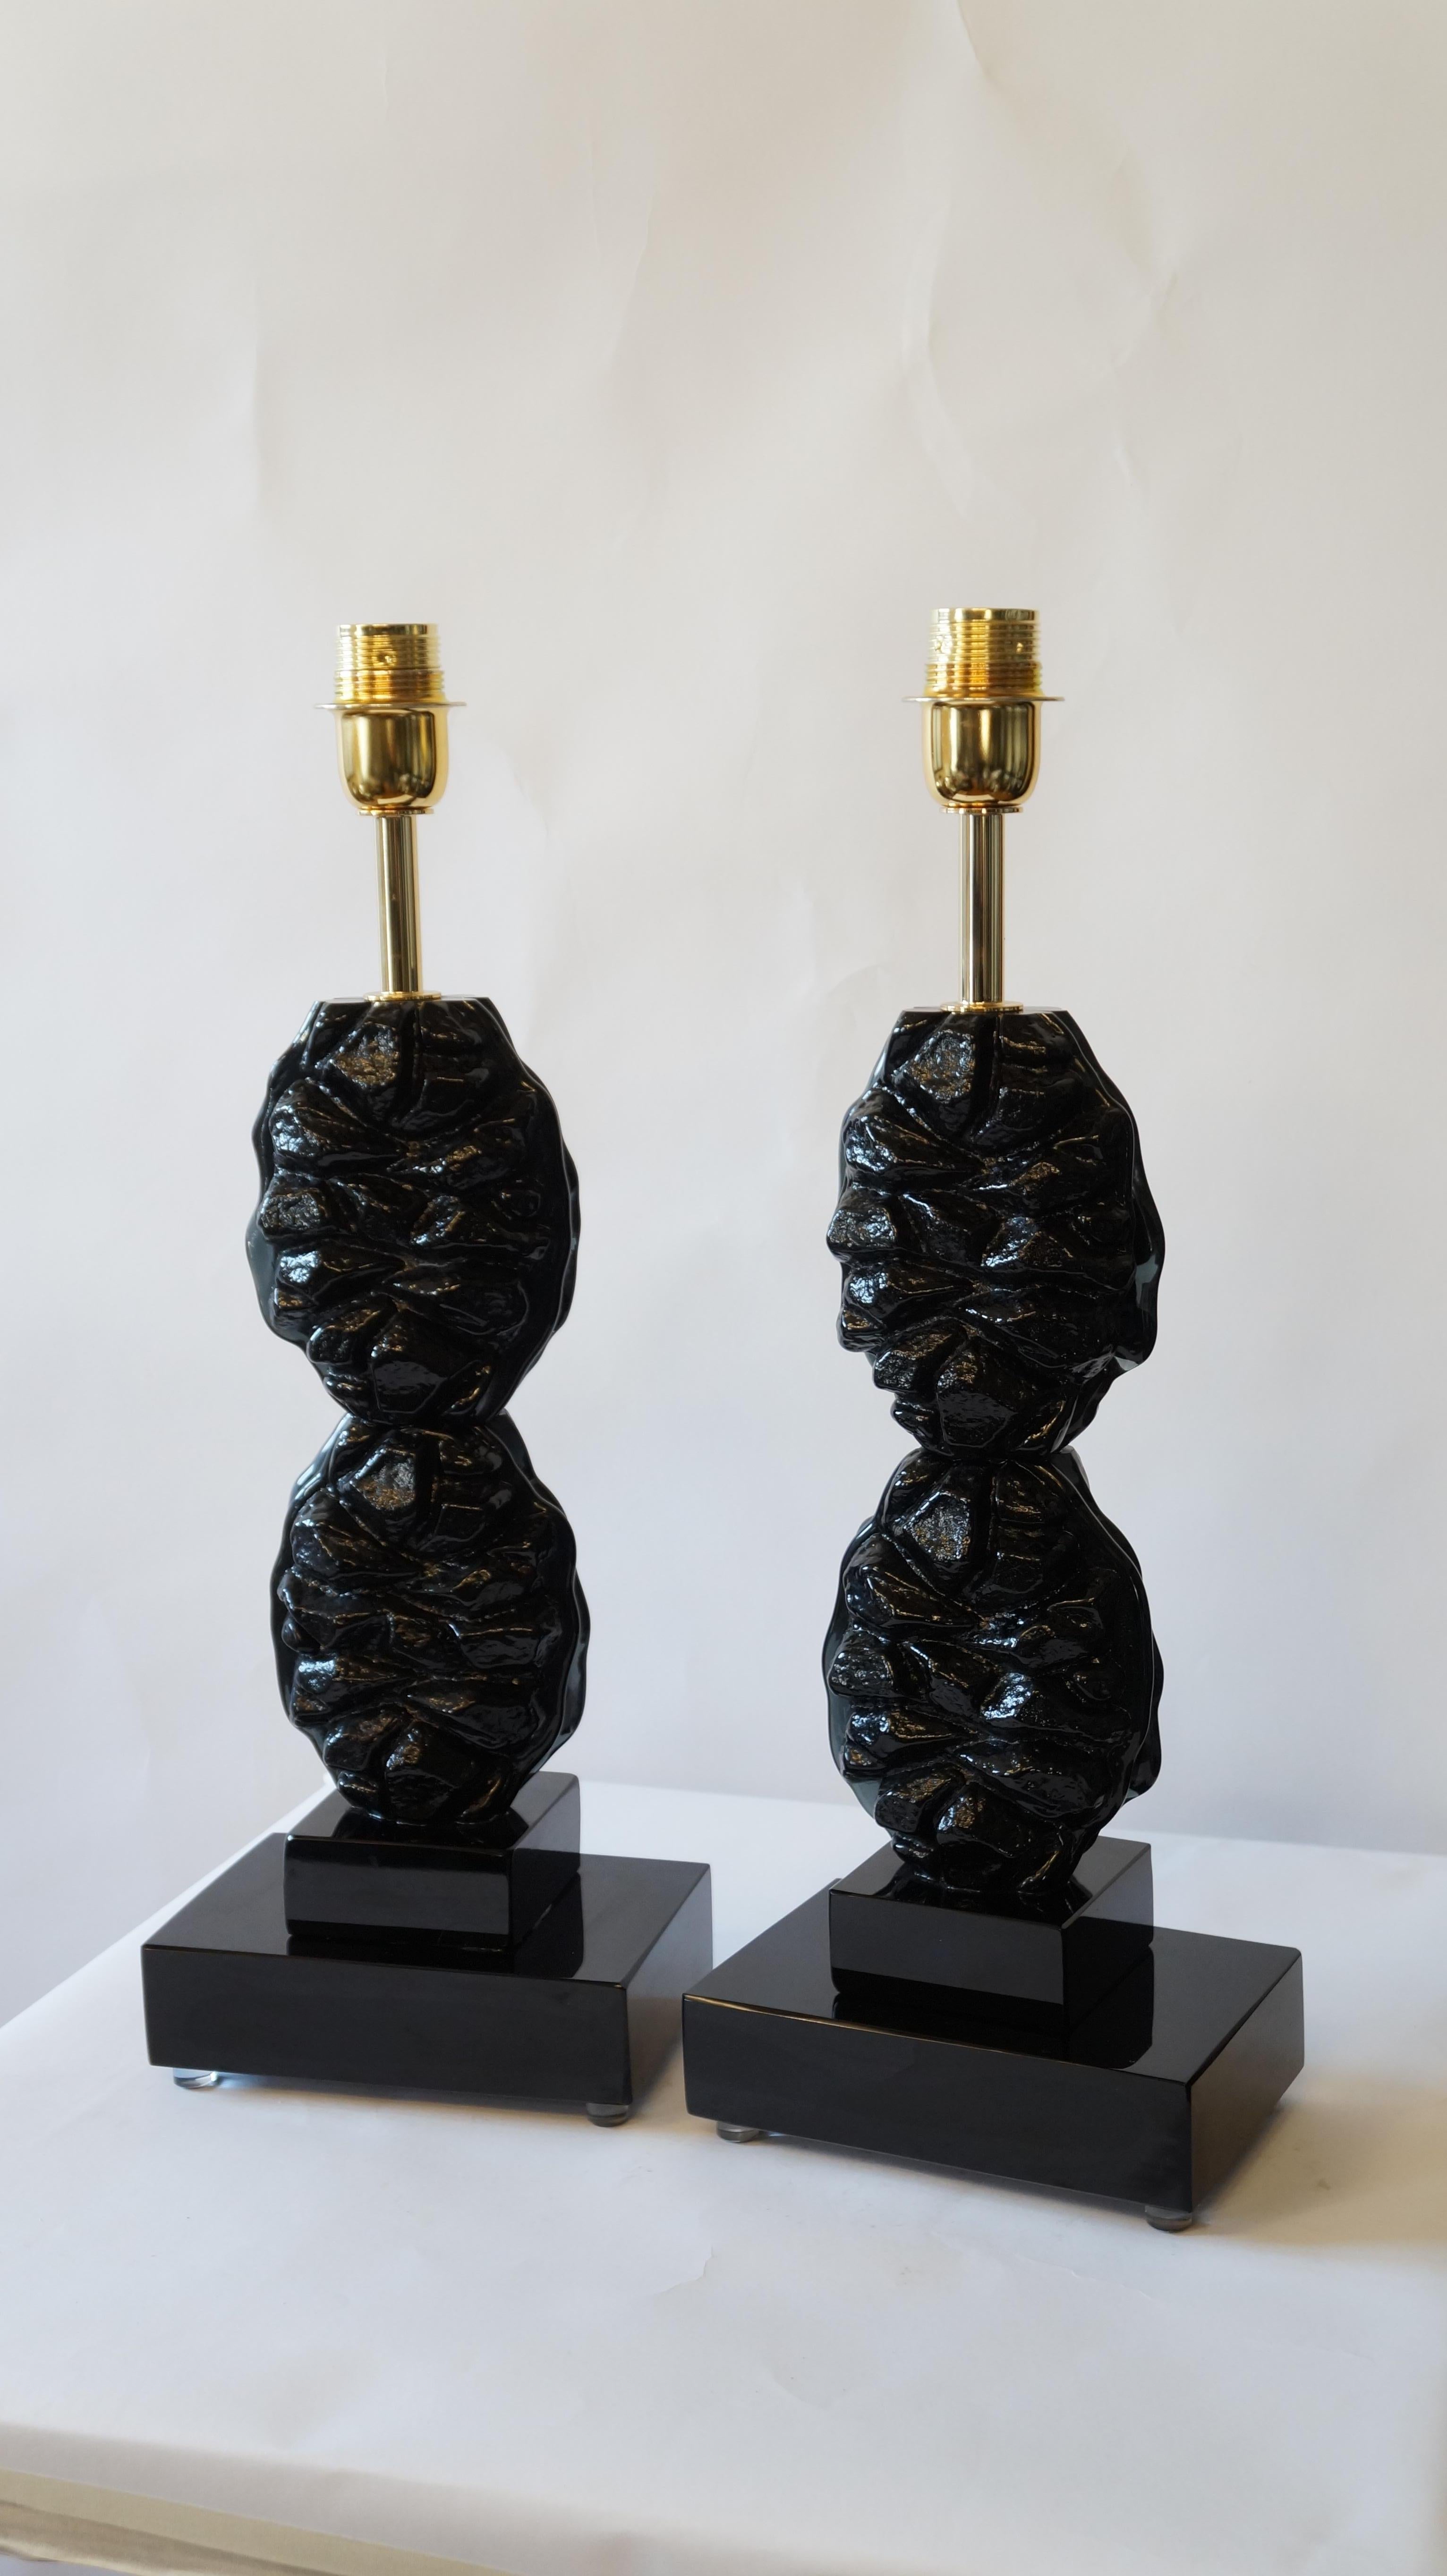 You have in front of you in the image you can see, two lamps made by Toso Murano in 1978. 
These lamps are very simple and characterized by the superimposition of this kind of glass with an icy touch, although in this case blacks. 
But they are